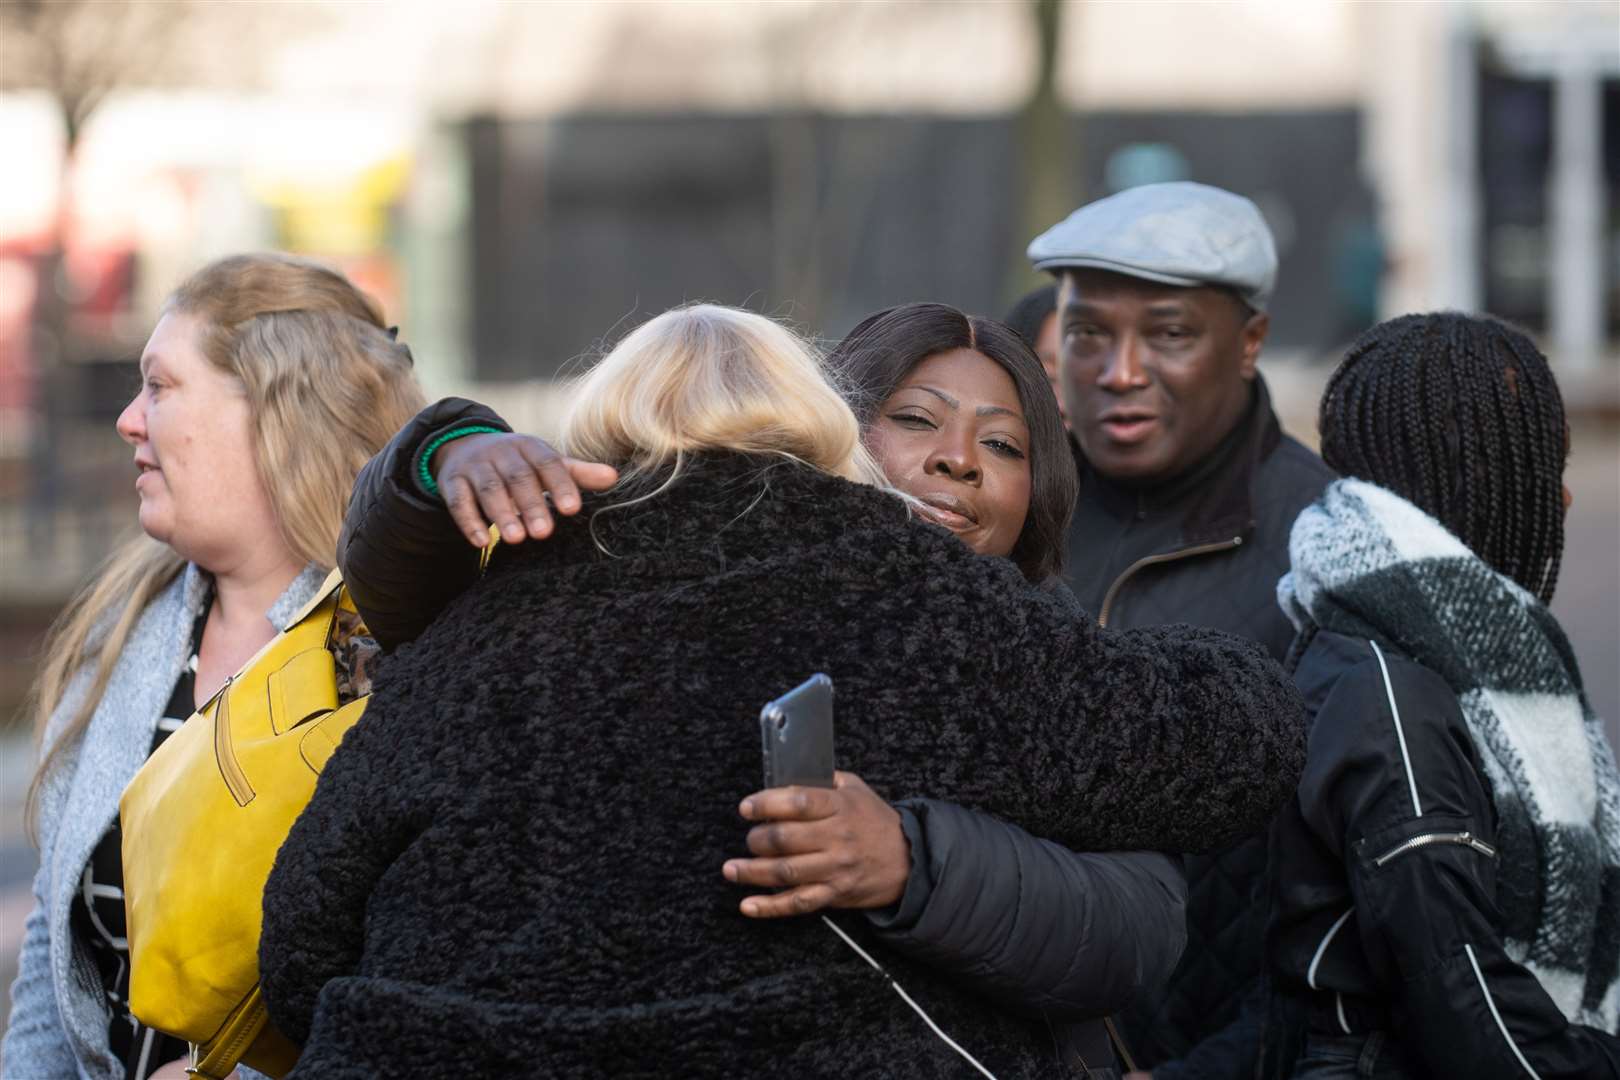 The family of Dom Ansah emabraced outside Luton Crown Court after the sentencing (Joe Giddens/PA)